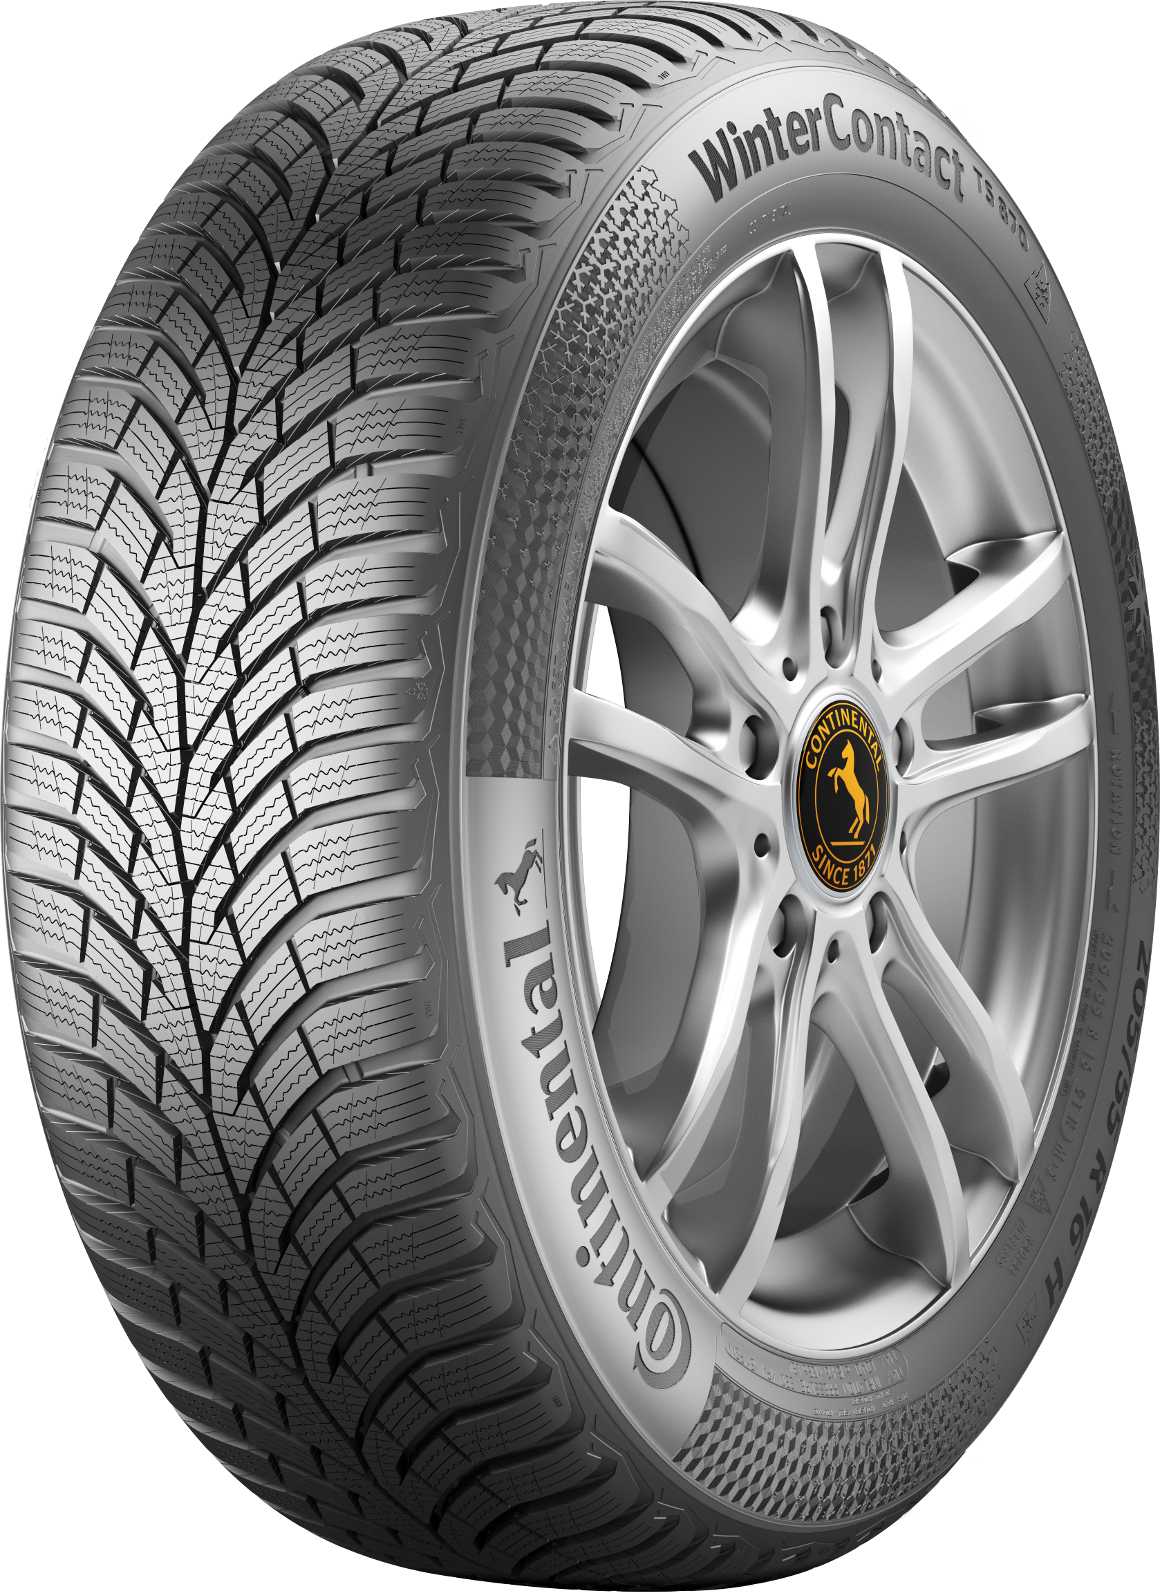    Continental Winter Contact TS870 185/60 R15 